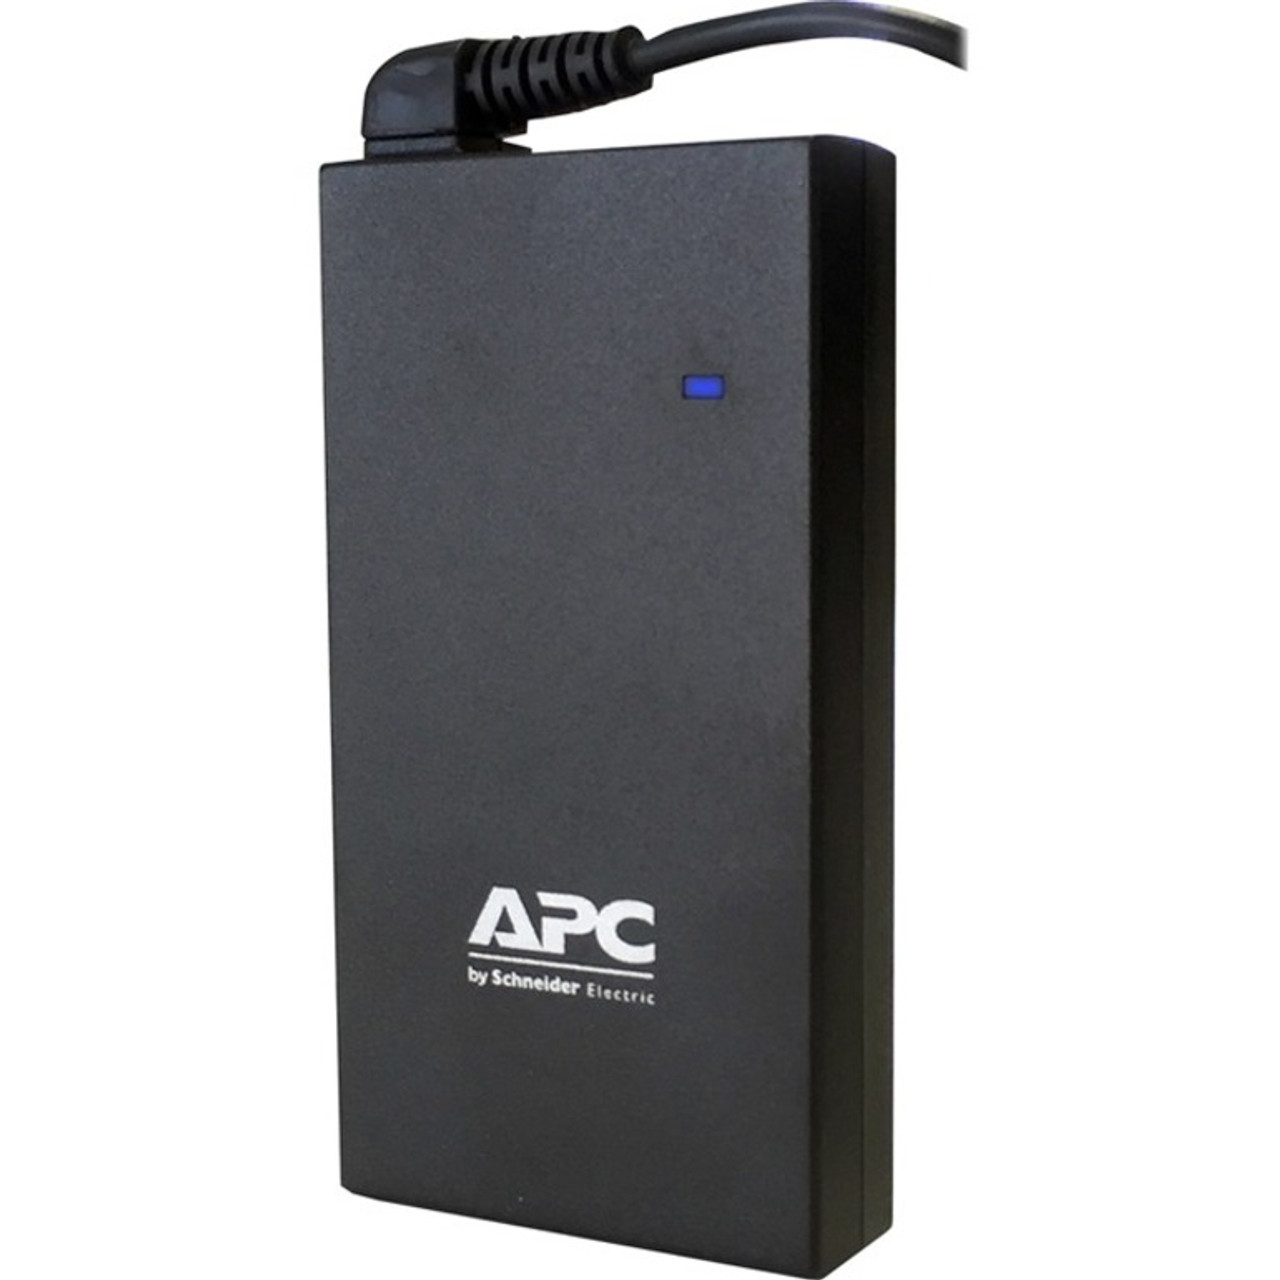 APC Universal Slim AC Adapter for HP Notebook Computers 65W 19V - 4 interchangeable locking tips - NP19V65W-H4TIPS